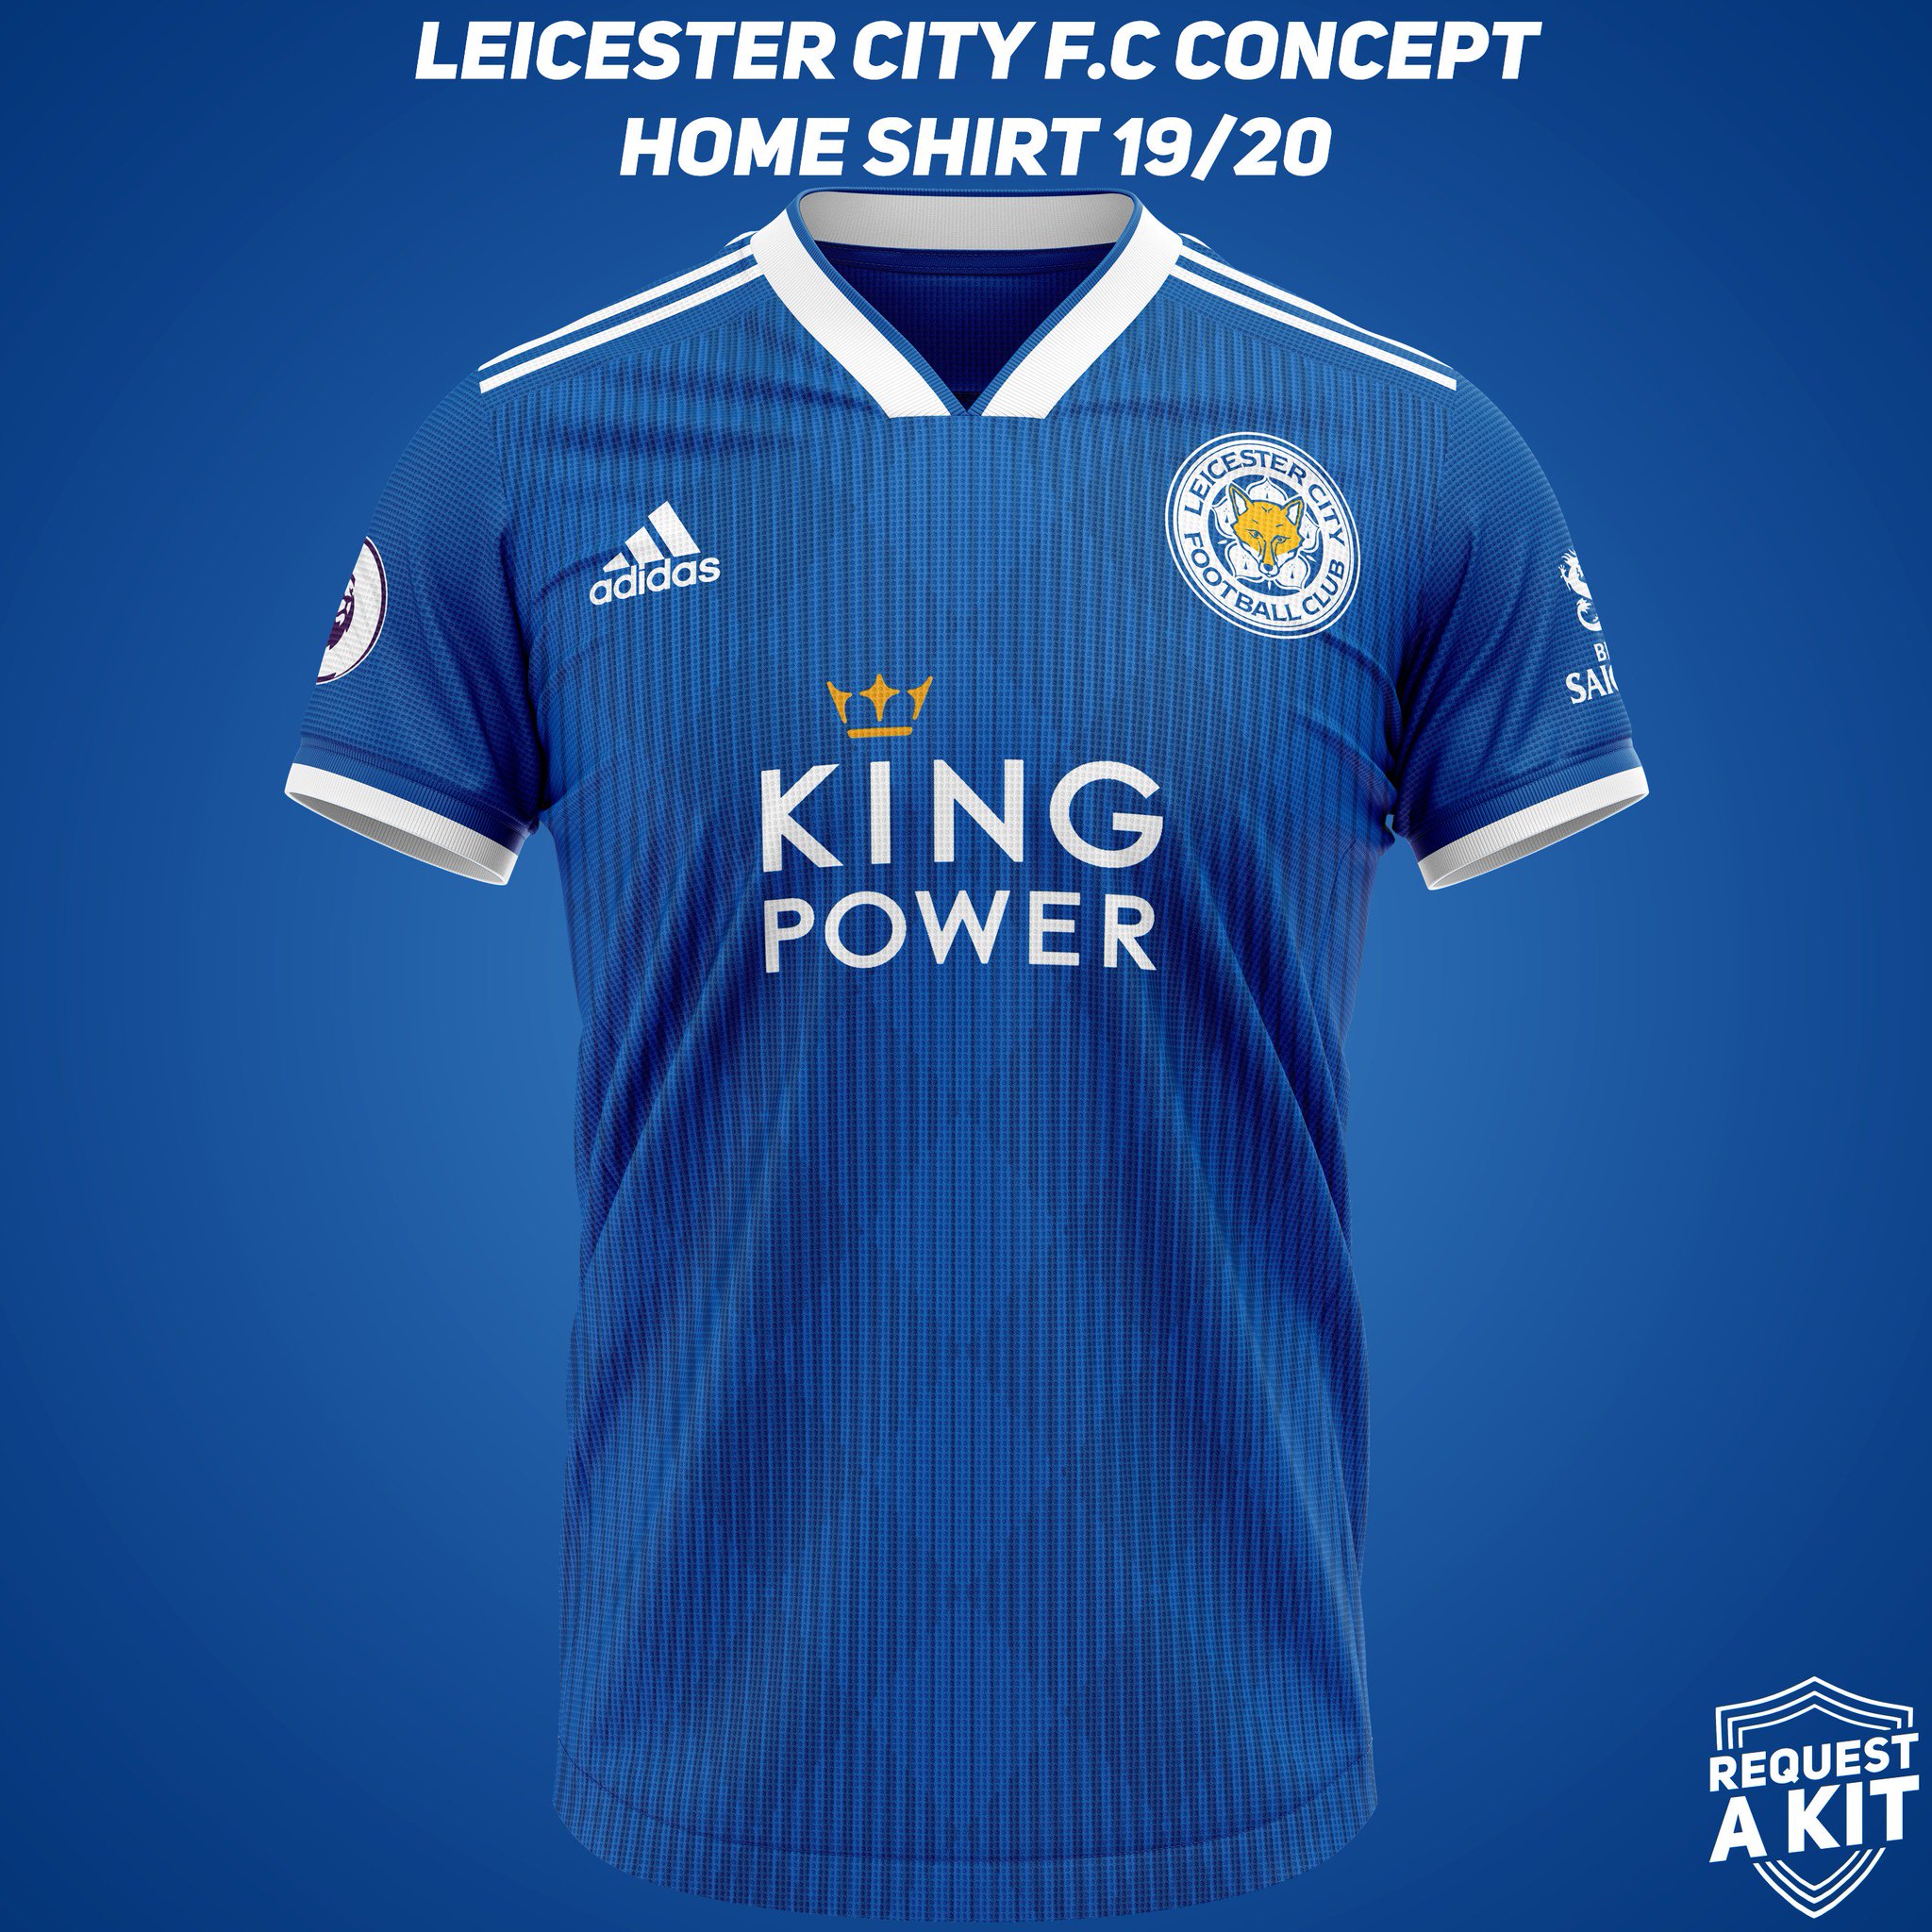 new leicester city kit